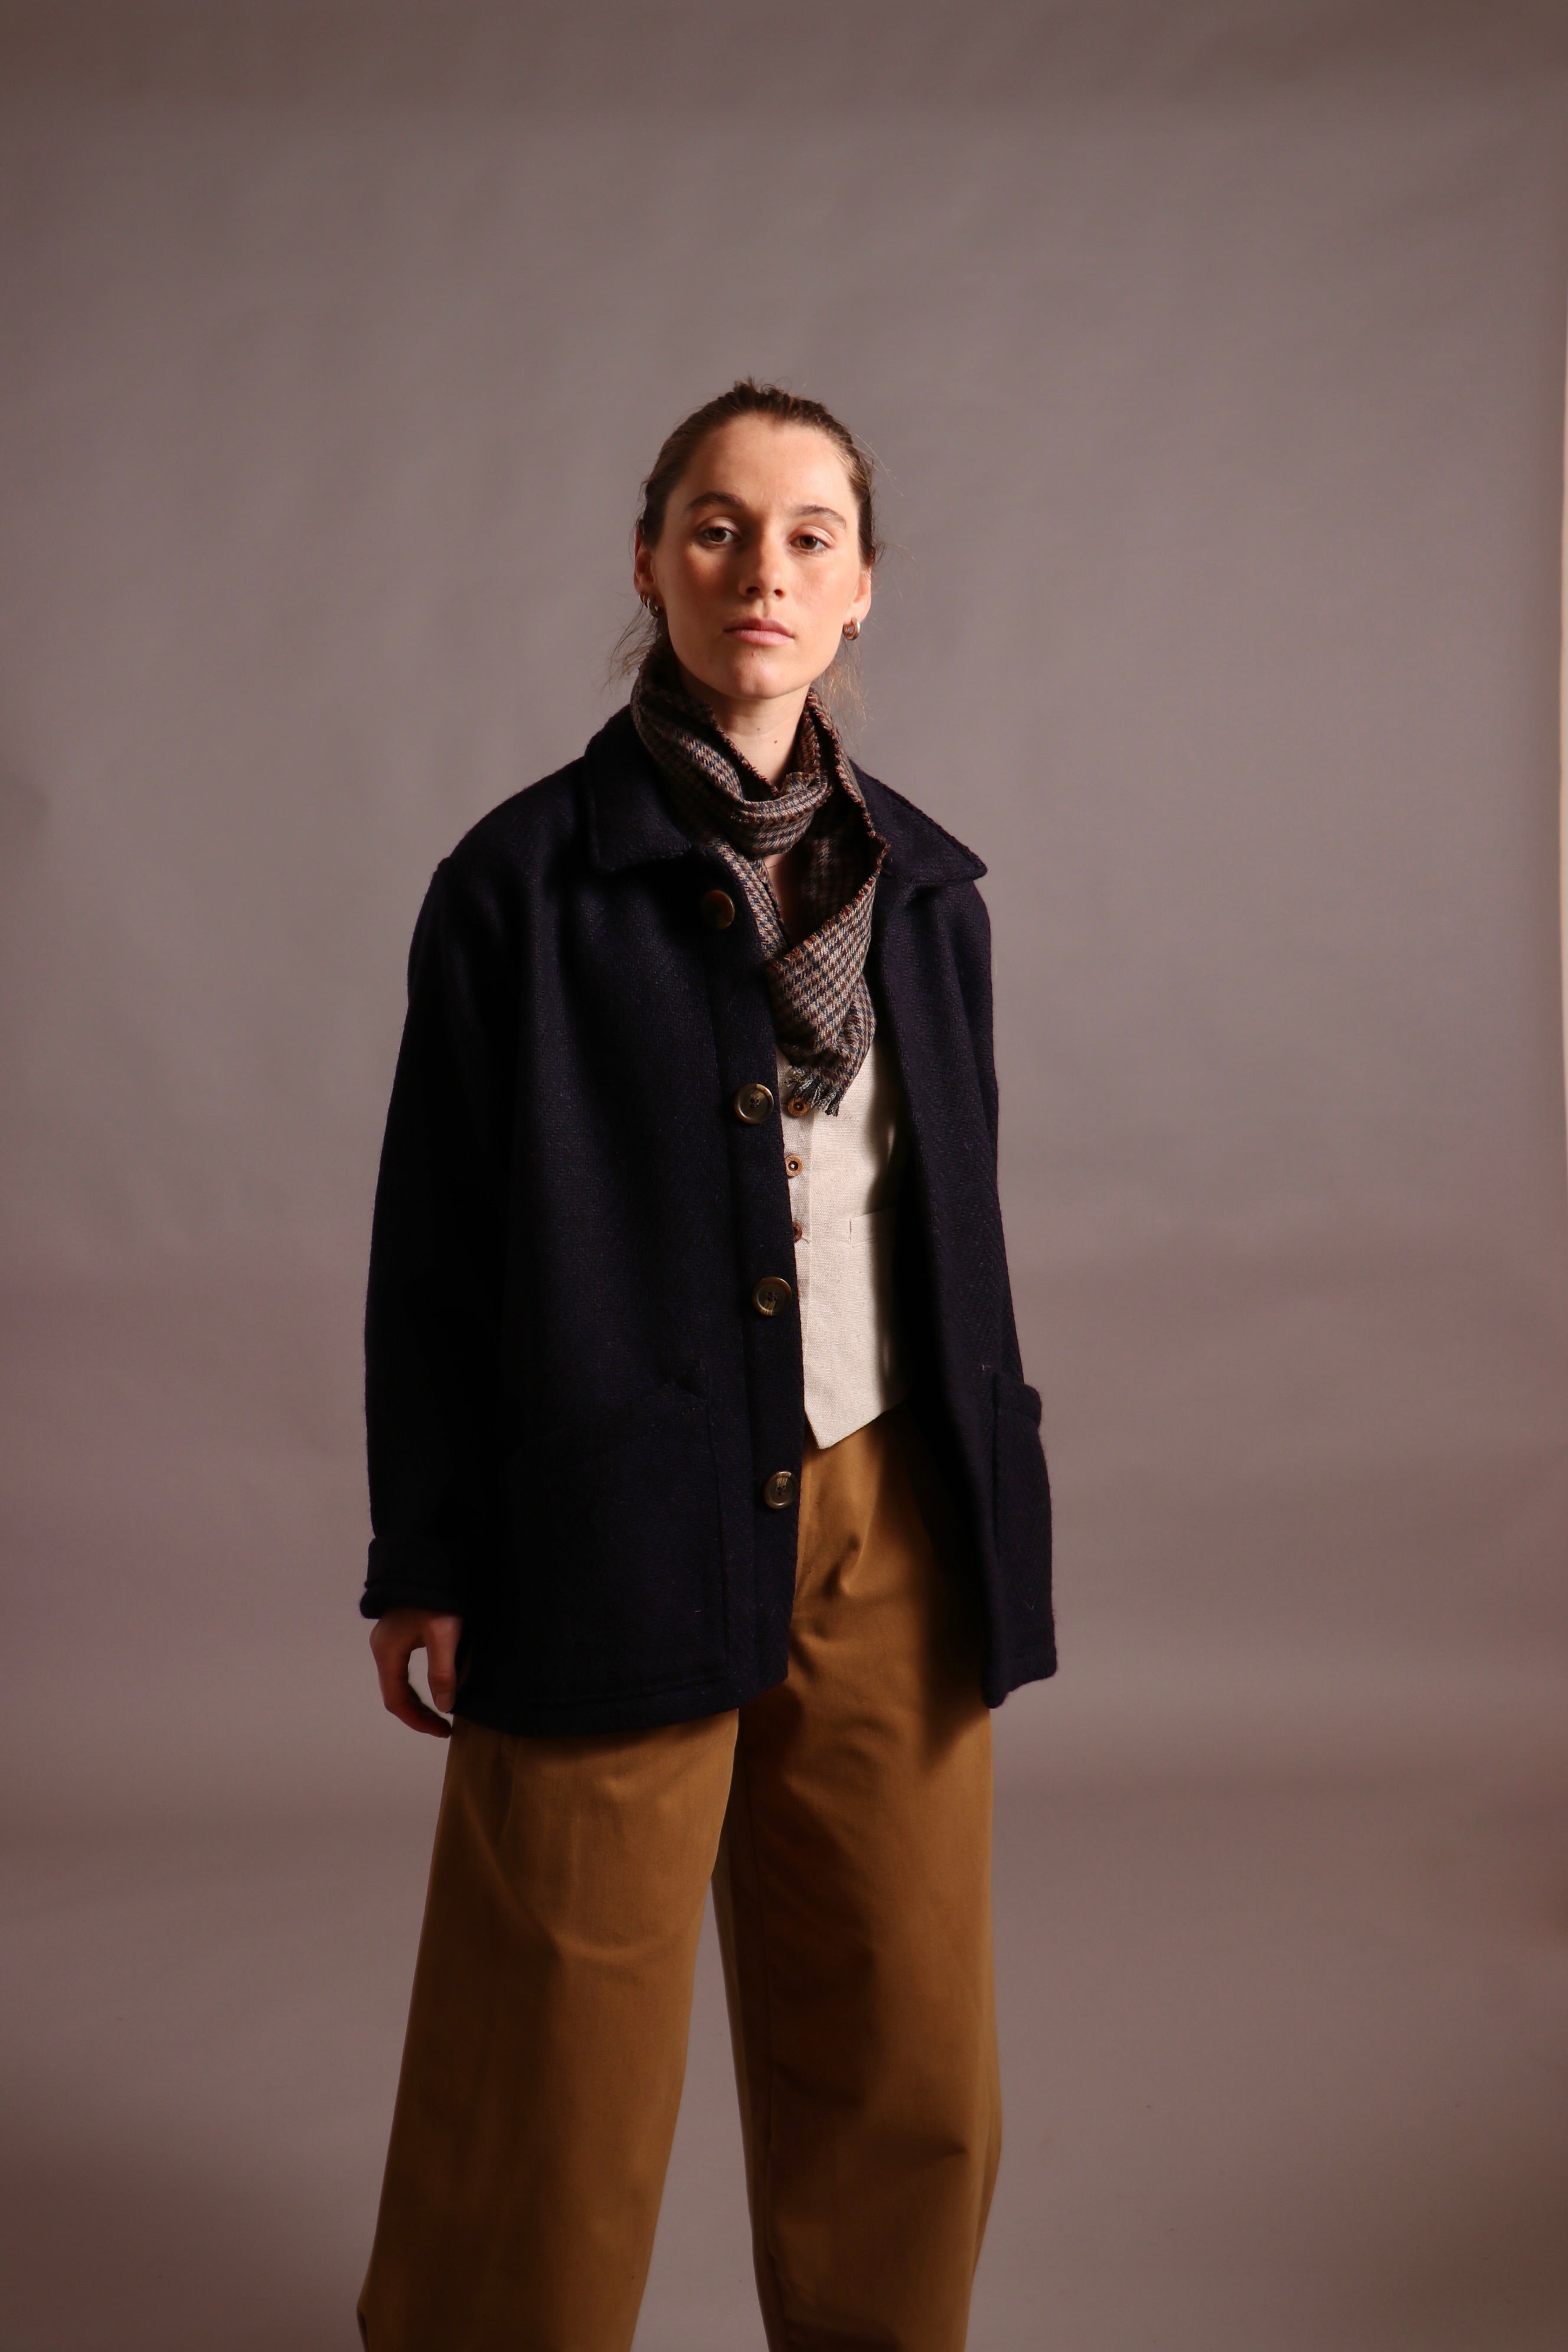 Decca wears Carrier Company Celtic Wool Jacket with Dutch trouser in Tan Cotton Drill, Wool Waistcoat and Scarf